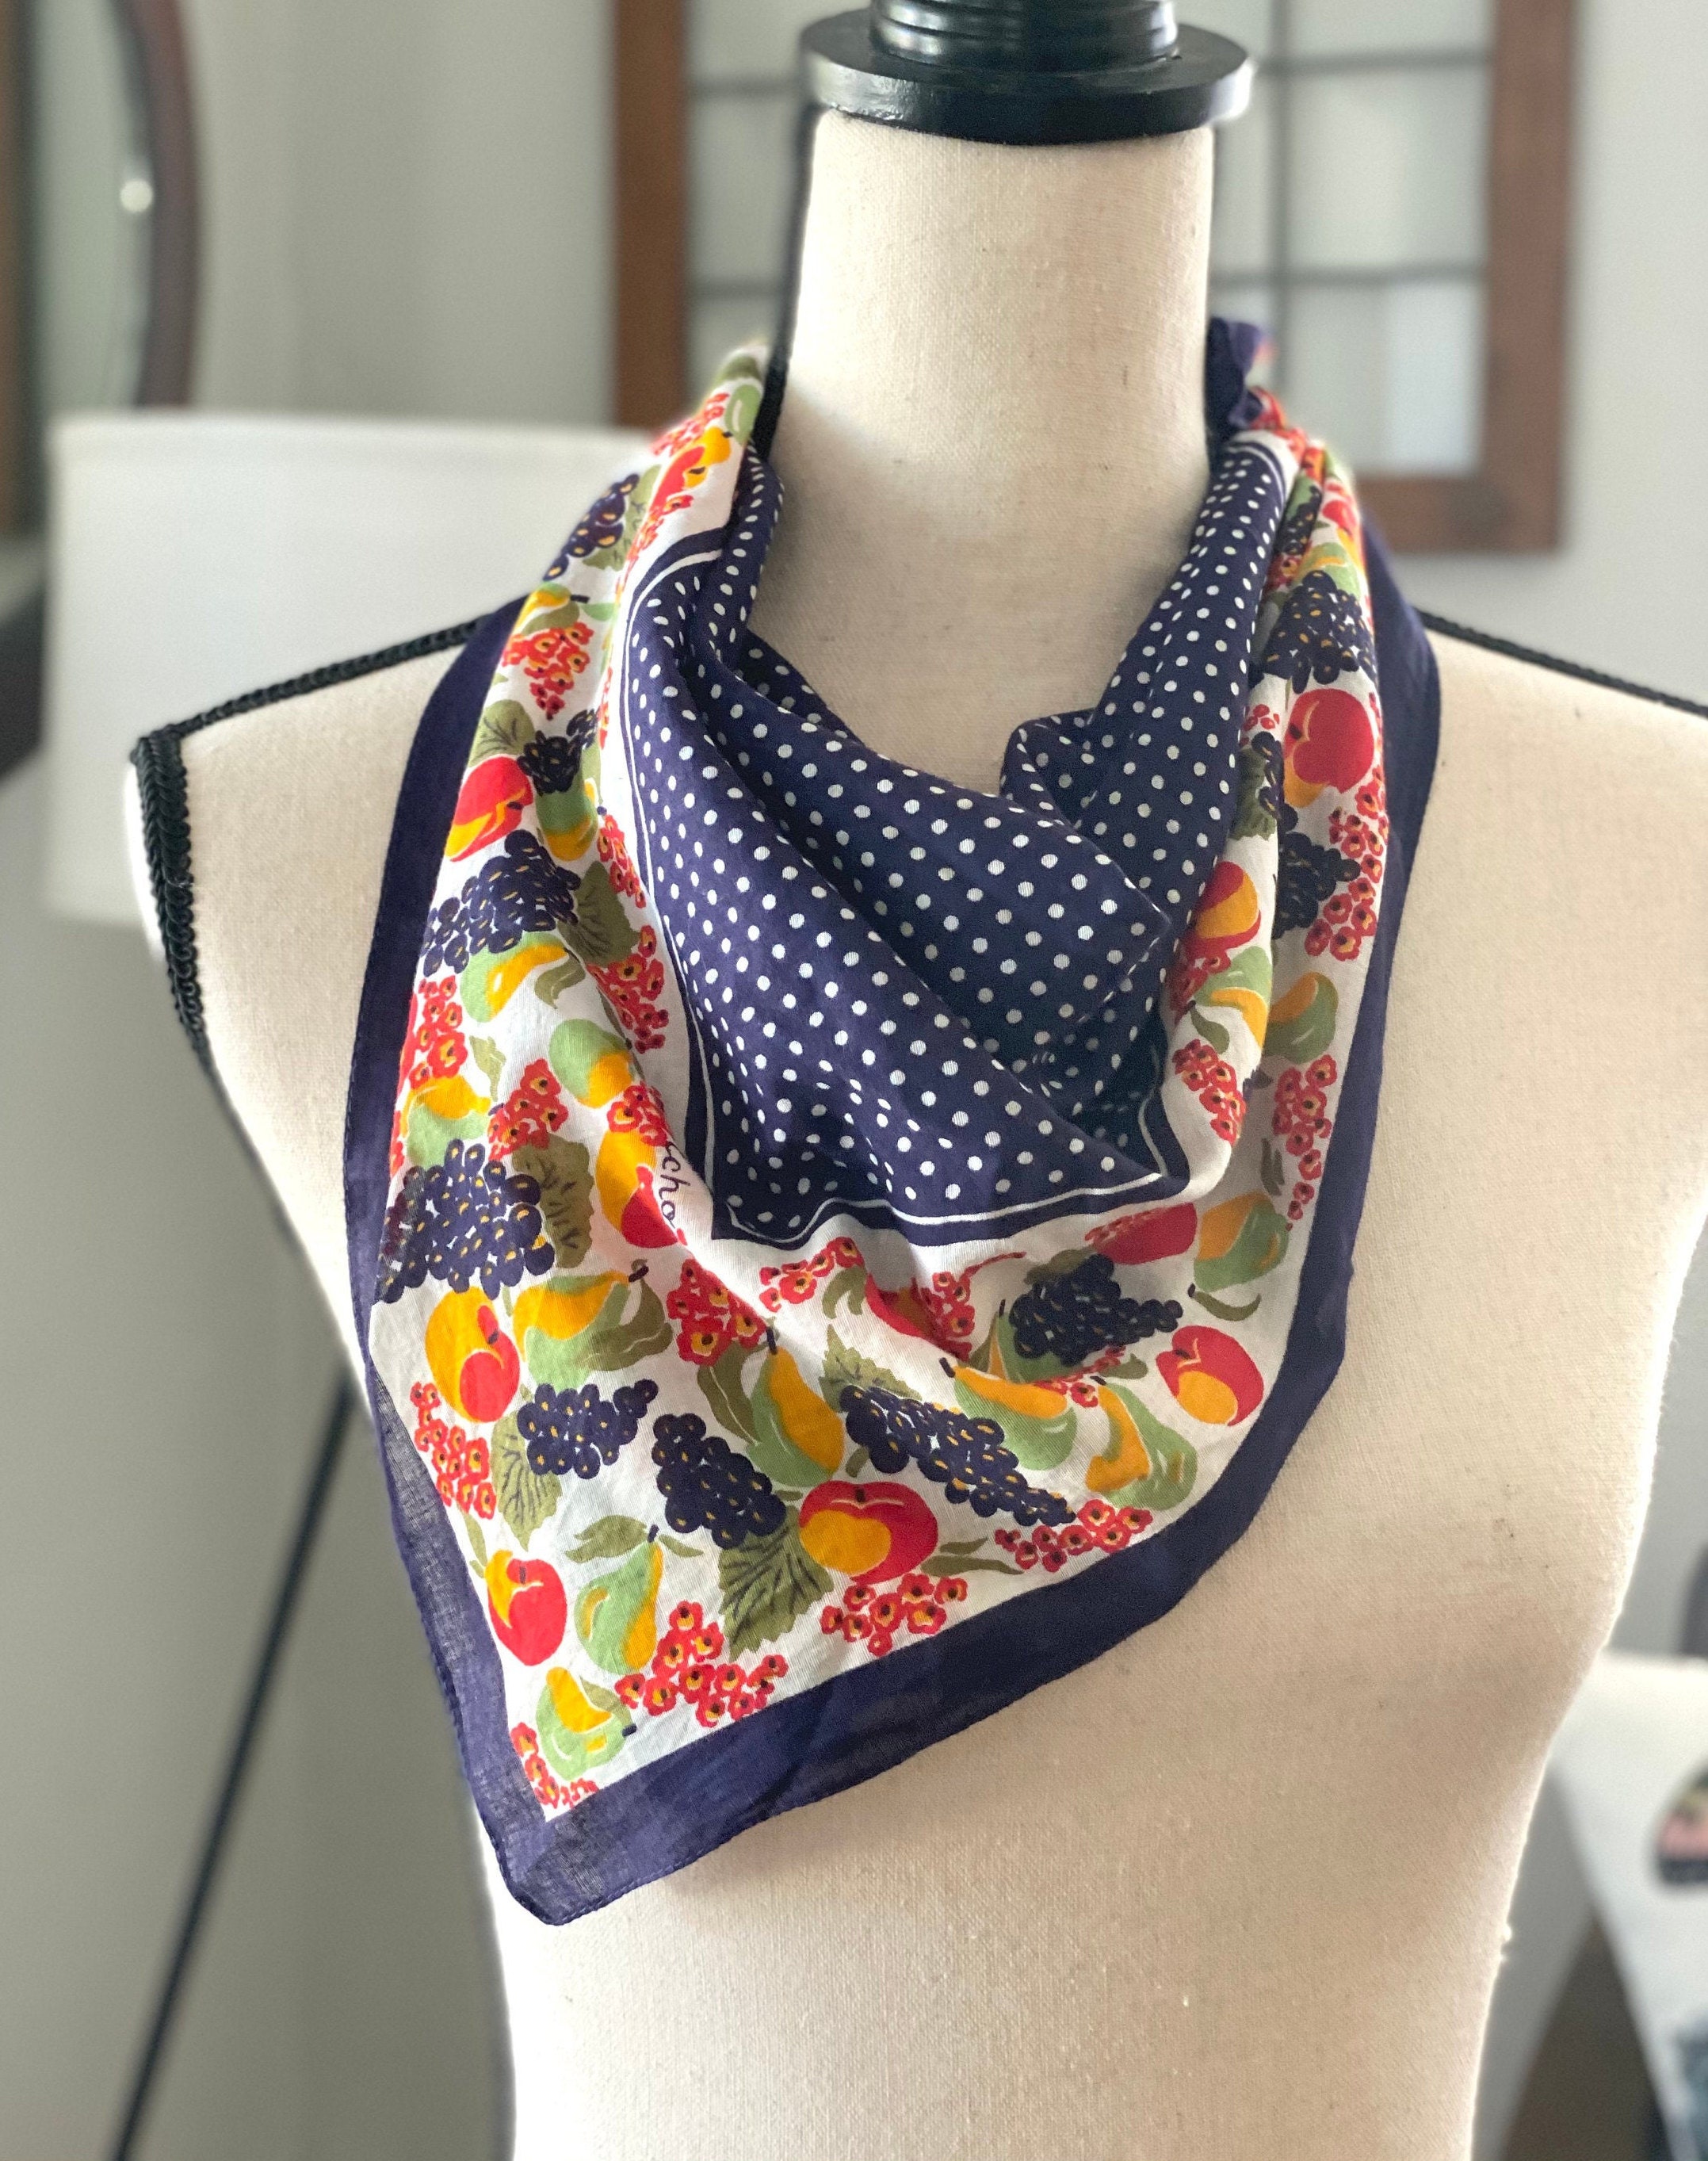 Scarf, Lovely Echo Linen Cotton Blend Hand Screened Scarf Or Decorative Sash, Vintage Ladies With Fruit & Dots, Fashion